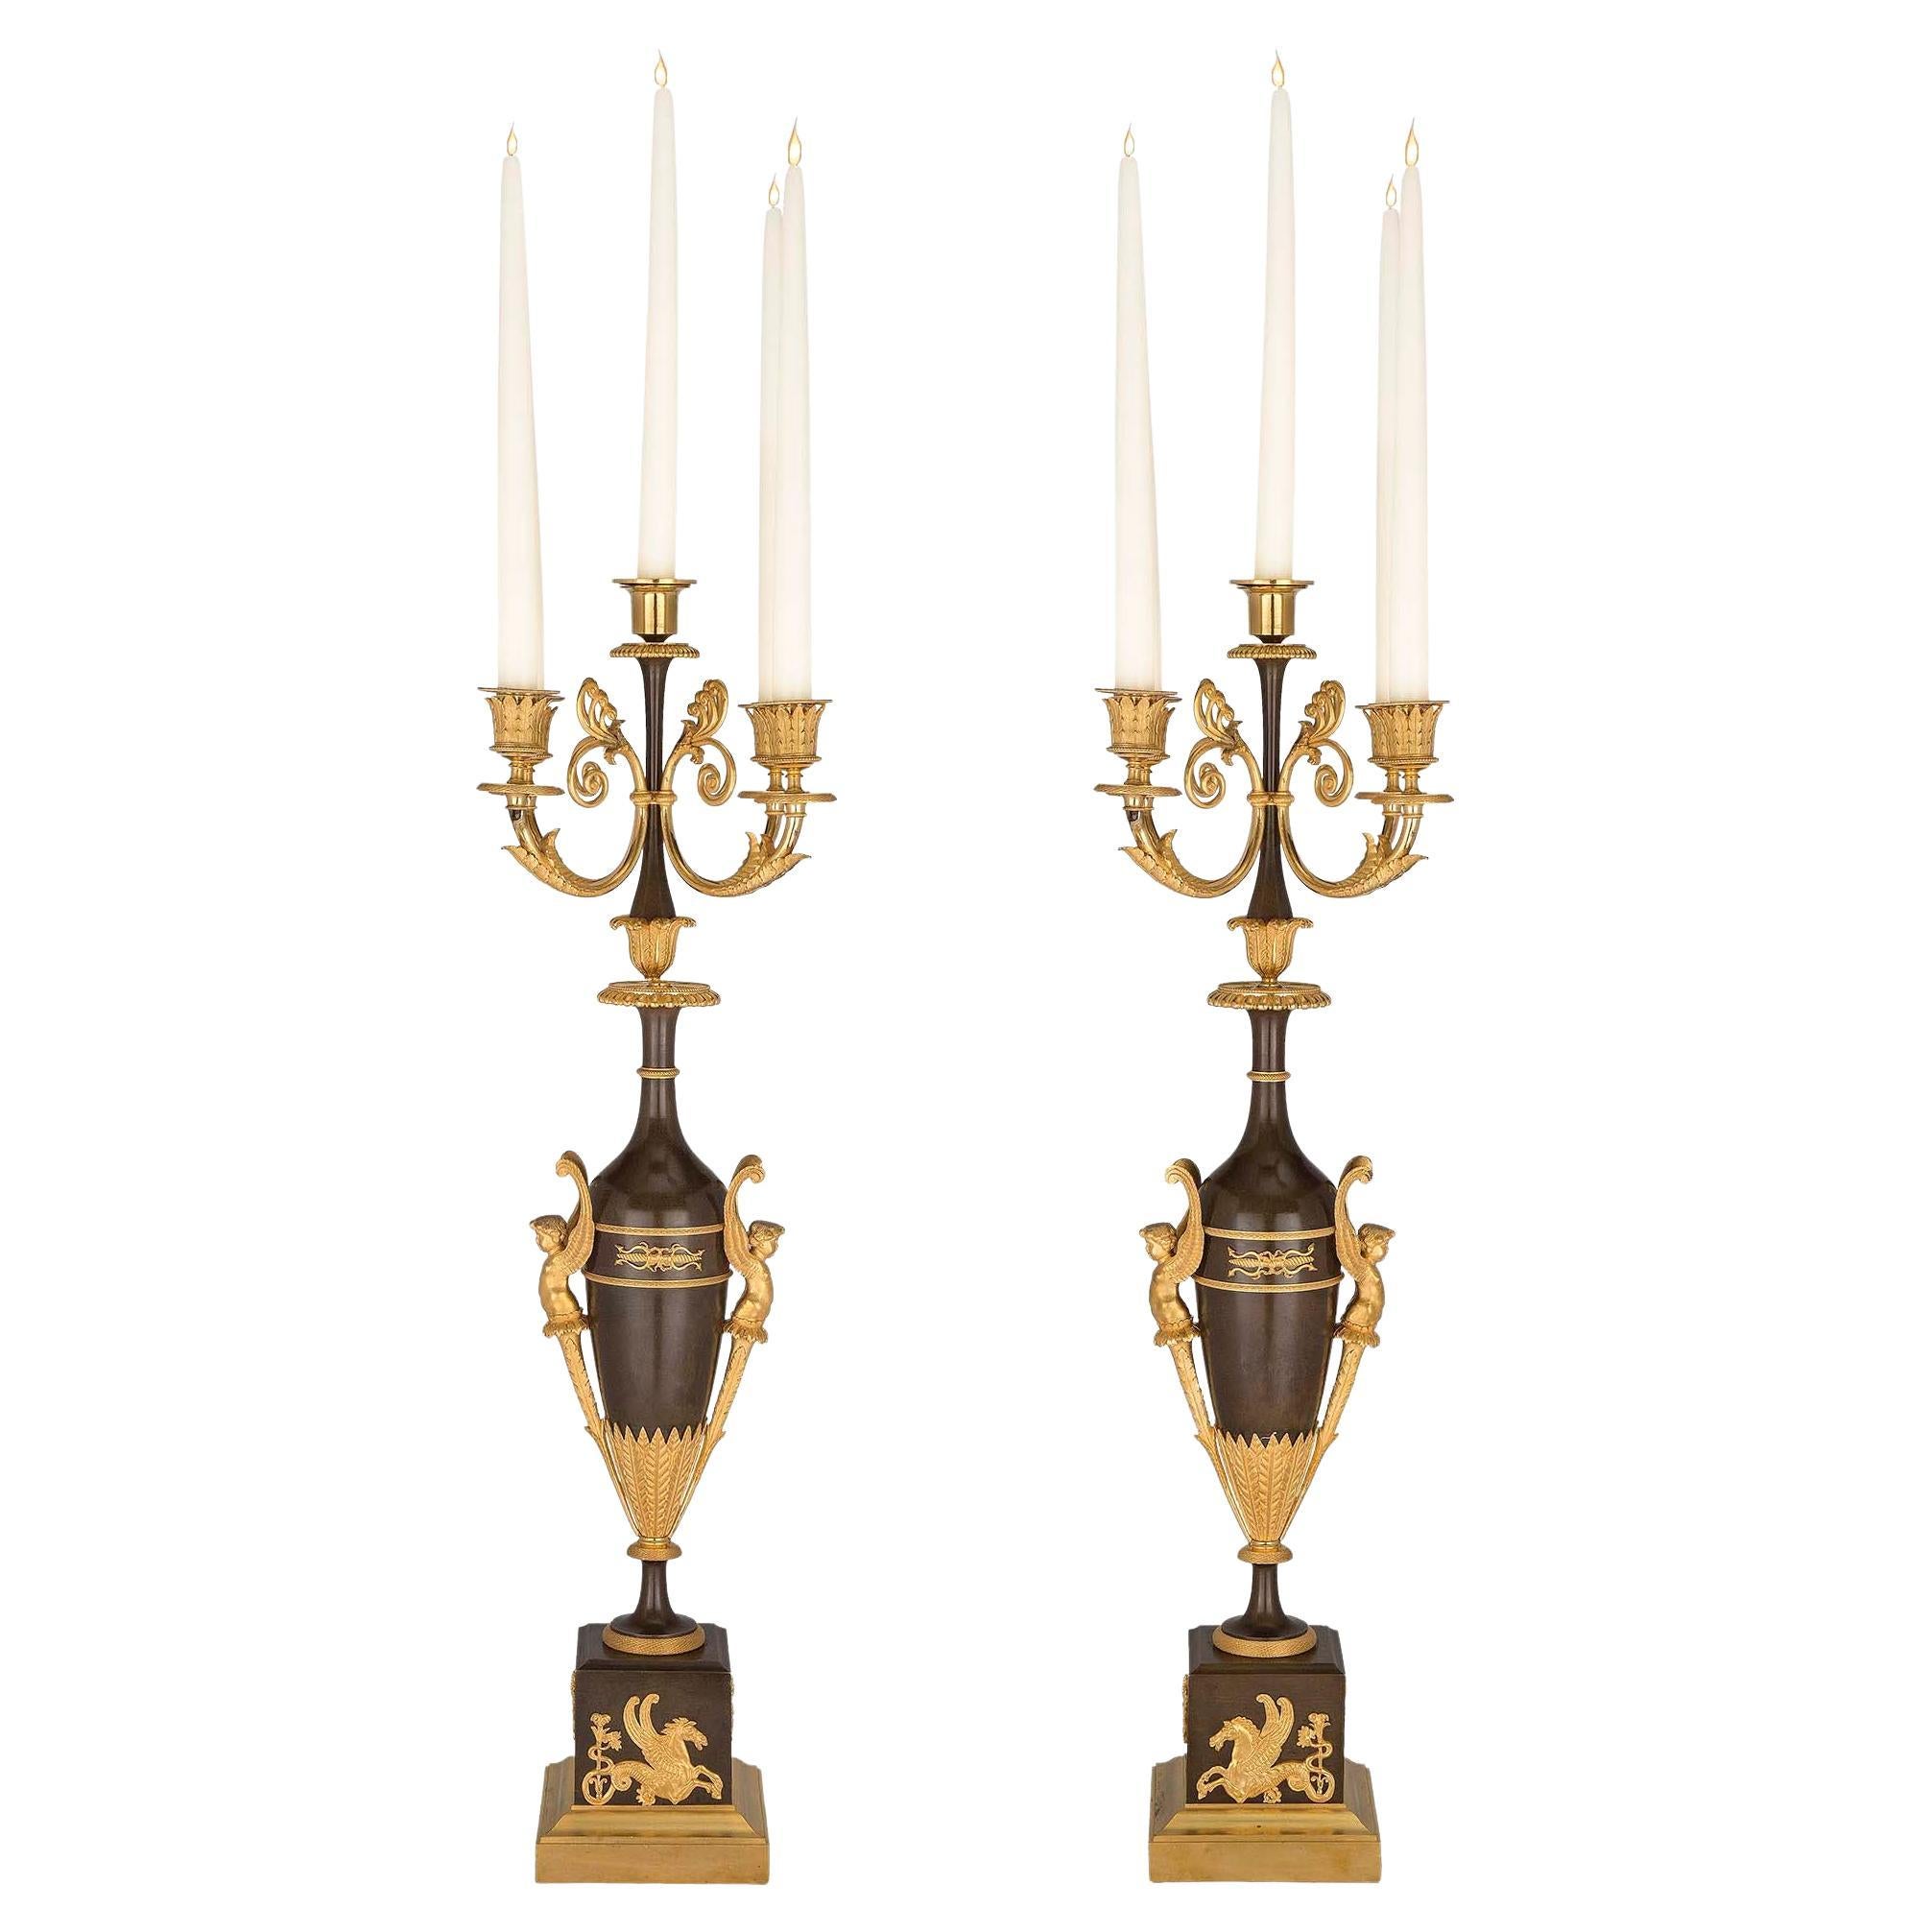 Pair of French 19th Century First Empire Period Bronze and Ormolu Candelabras For Sale